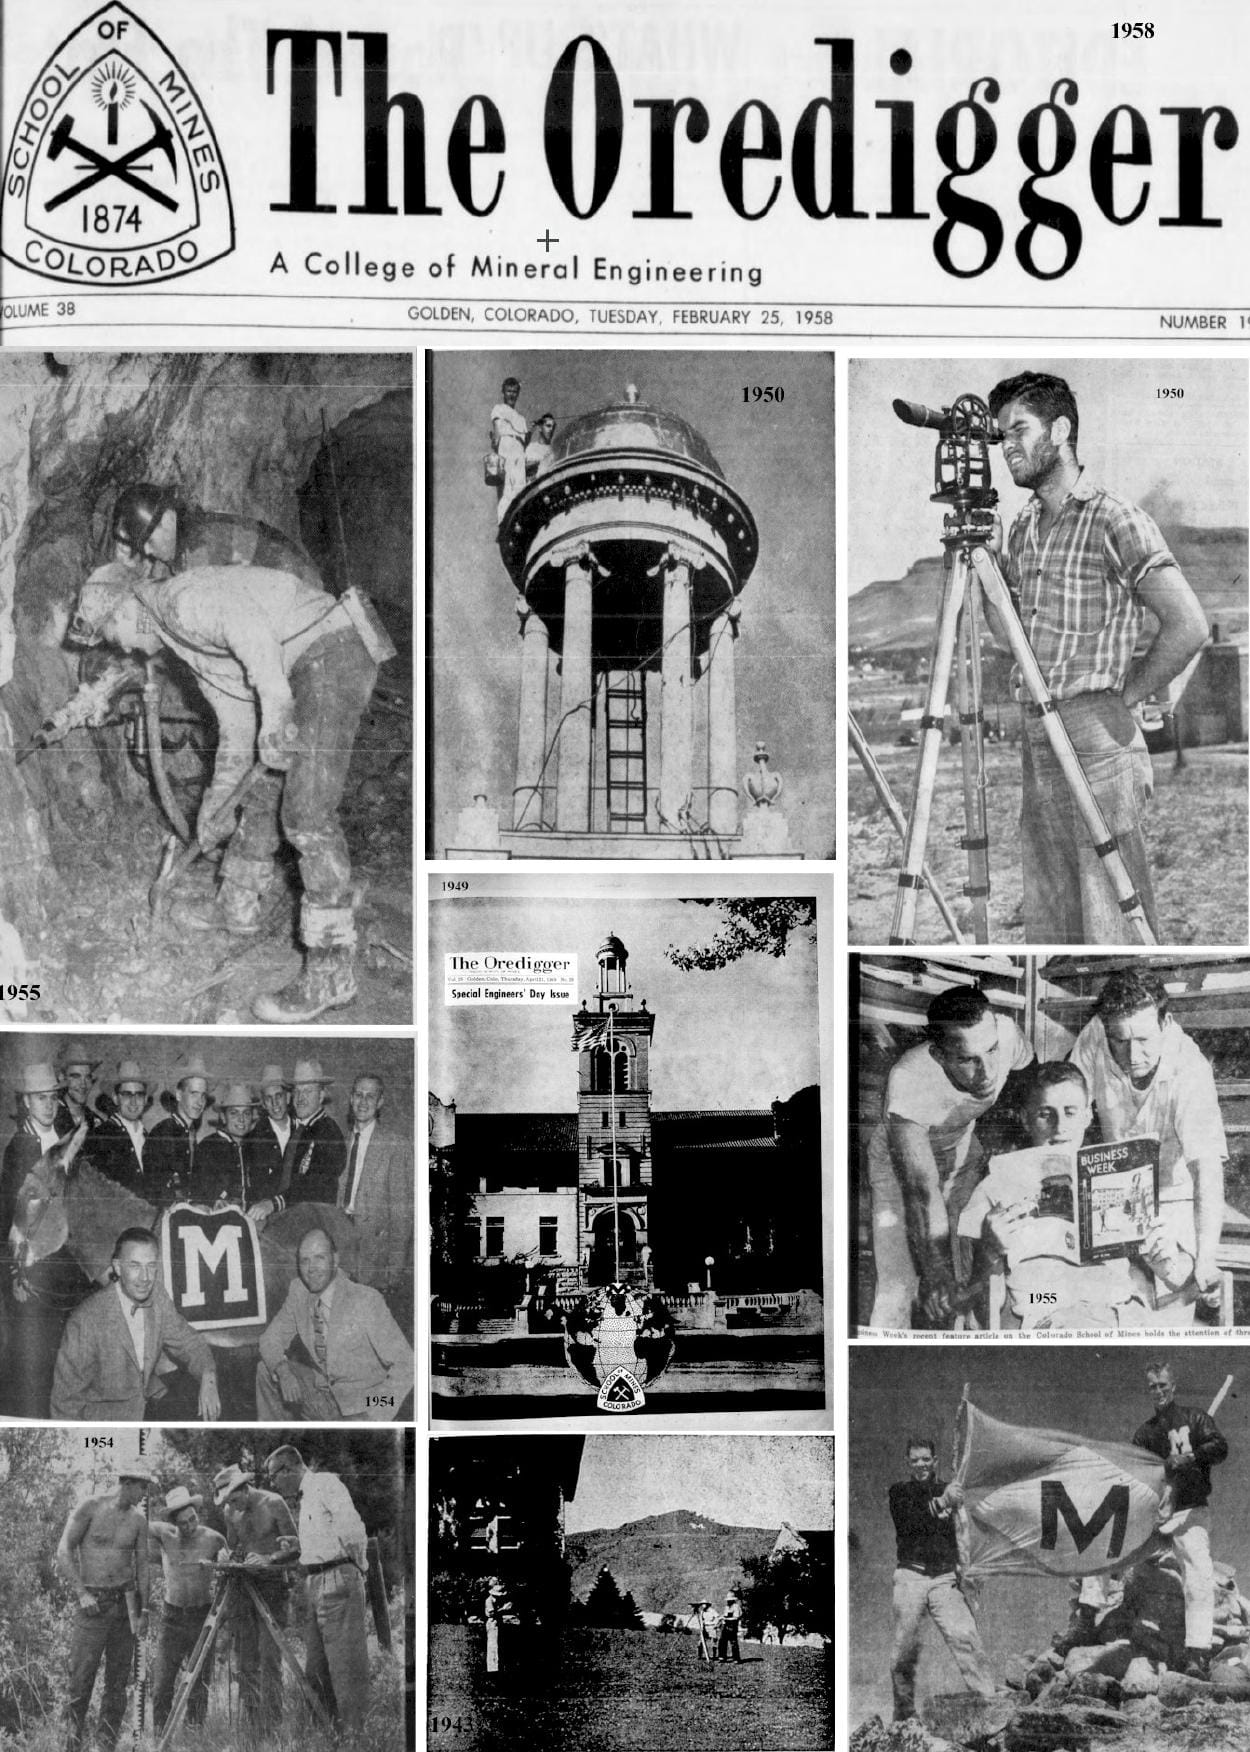 masthead from February 25, 1958 plus photos of students, 1940s and 1950s